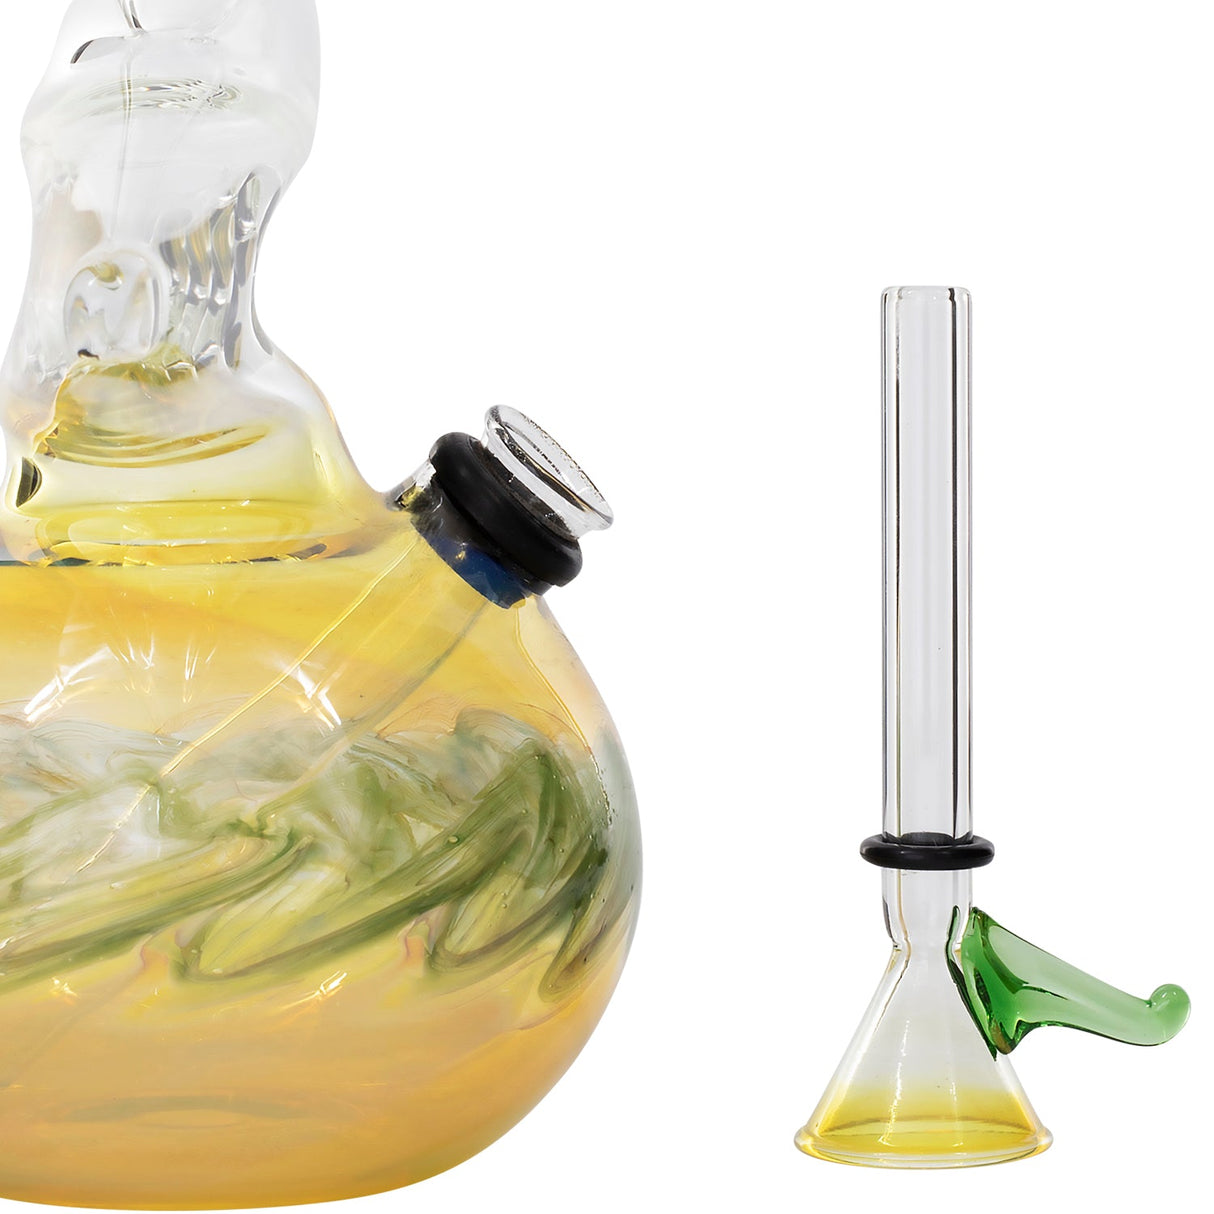 LA Pipes Zong-Bubble-Bong with Grommet Joint and Clear Downstem, Side View on White